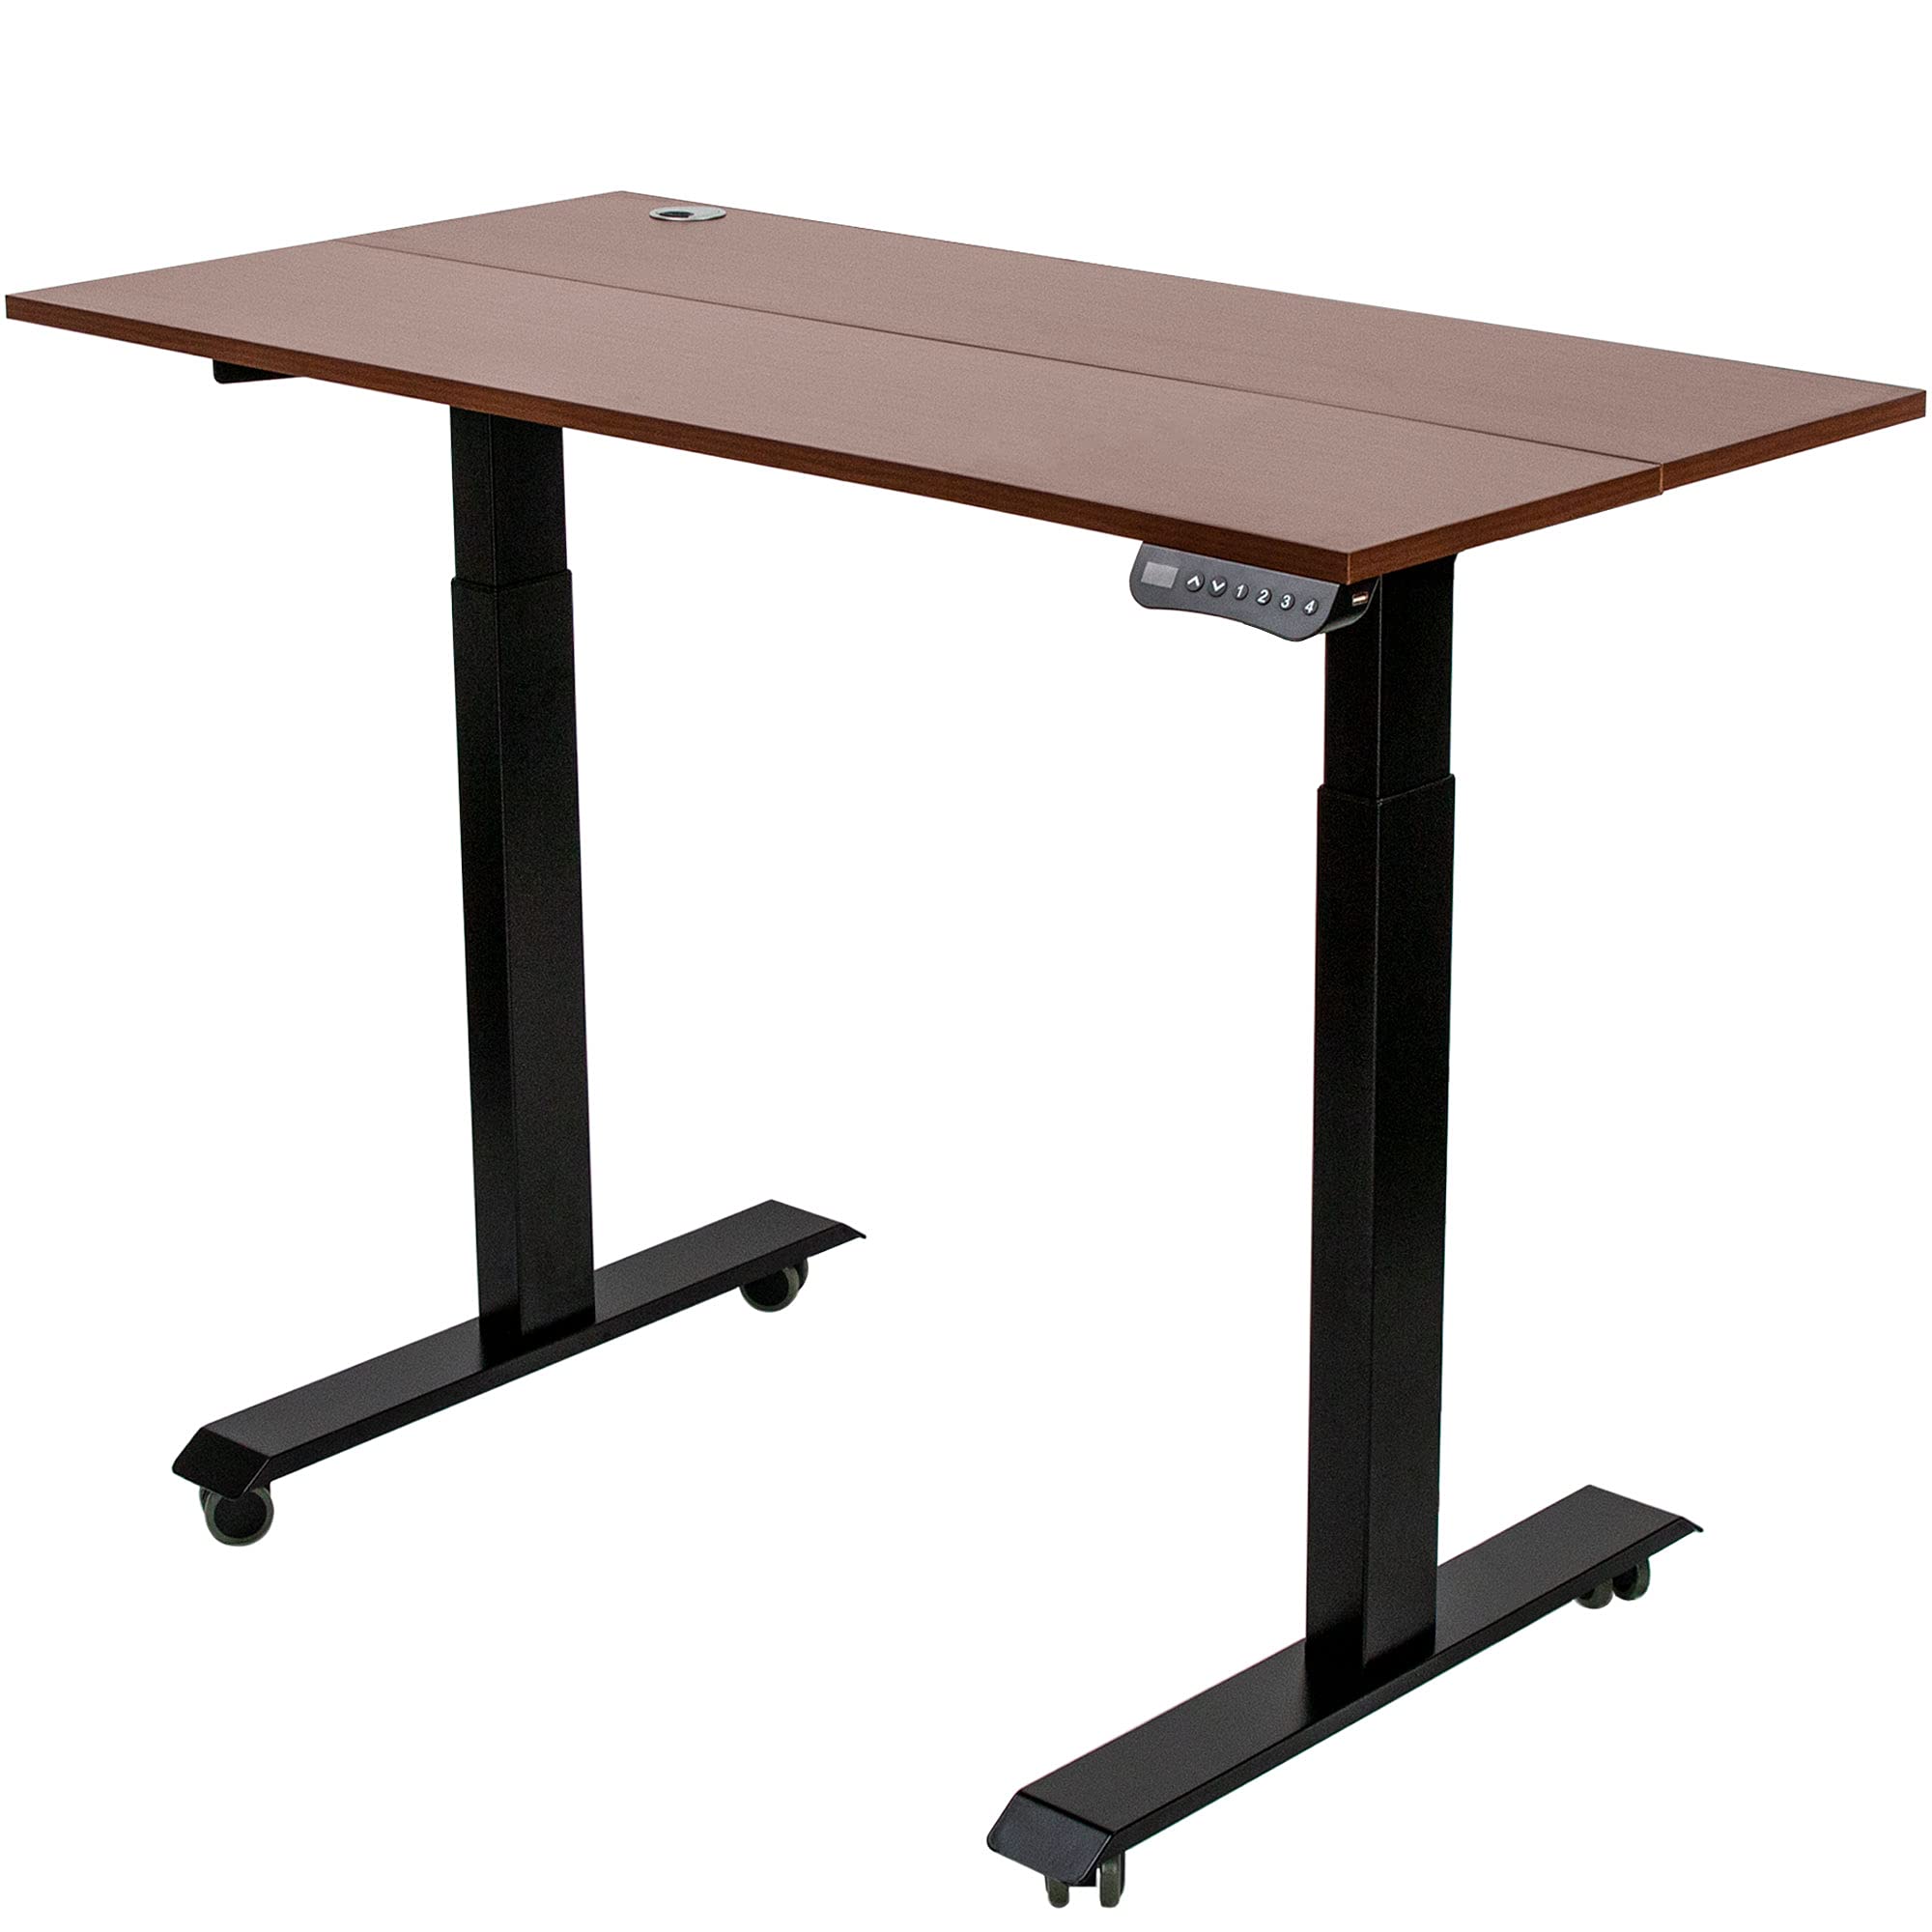 Electric Height Adjustable Standing Desk - 48 x 24 Inches Full Sit Stand Home Office Table with Desktop - 2-Stage Motor 4 Memory Control Ergonomic ...